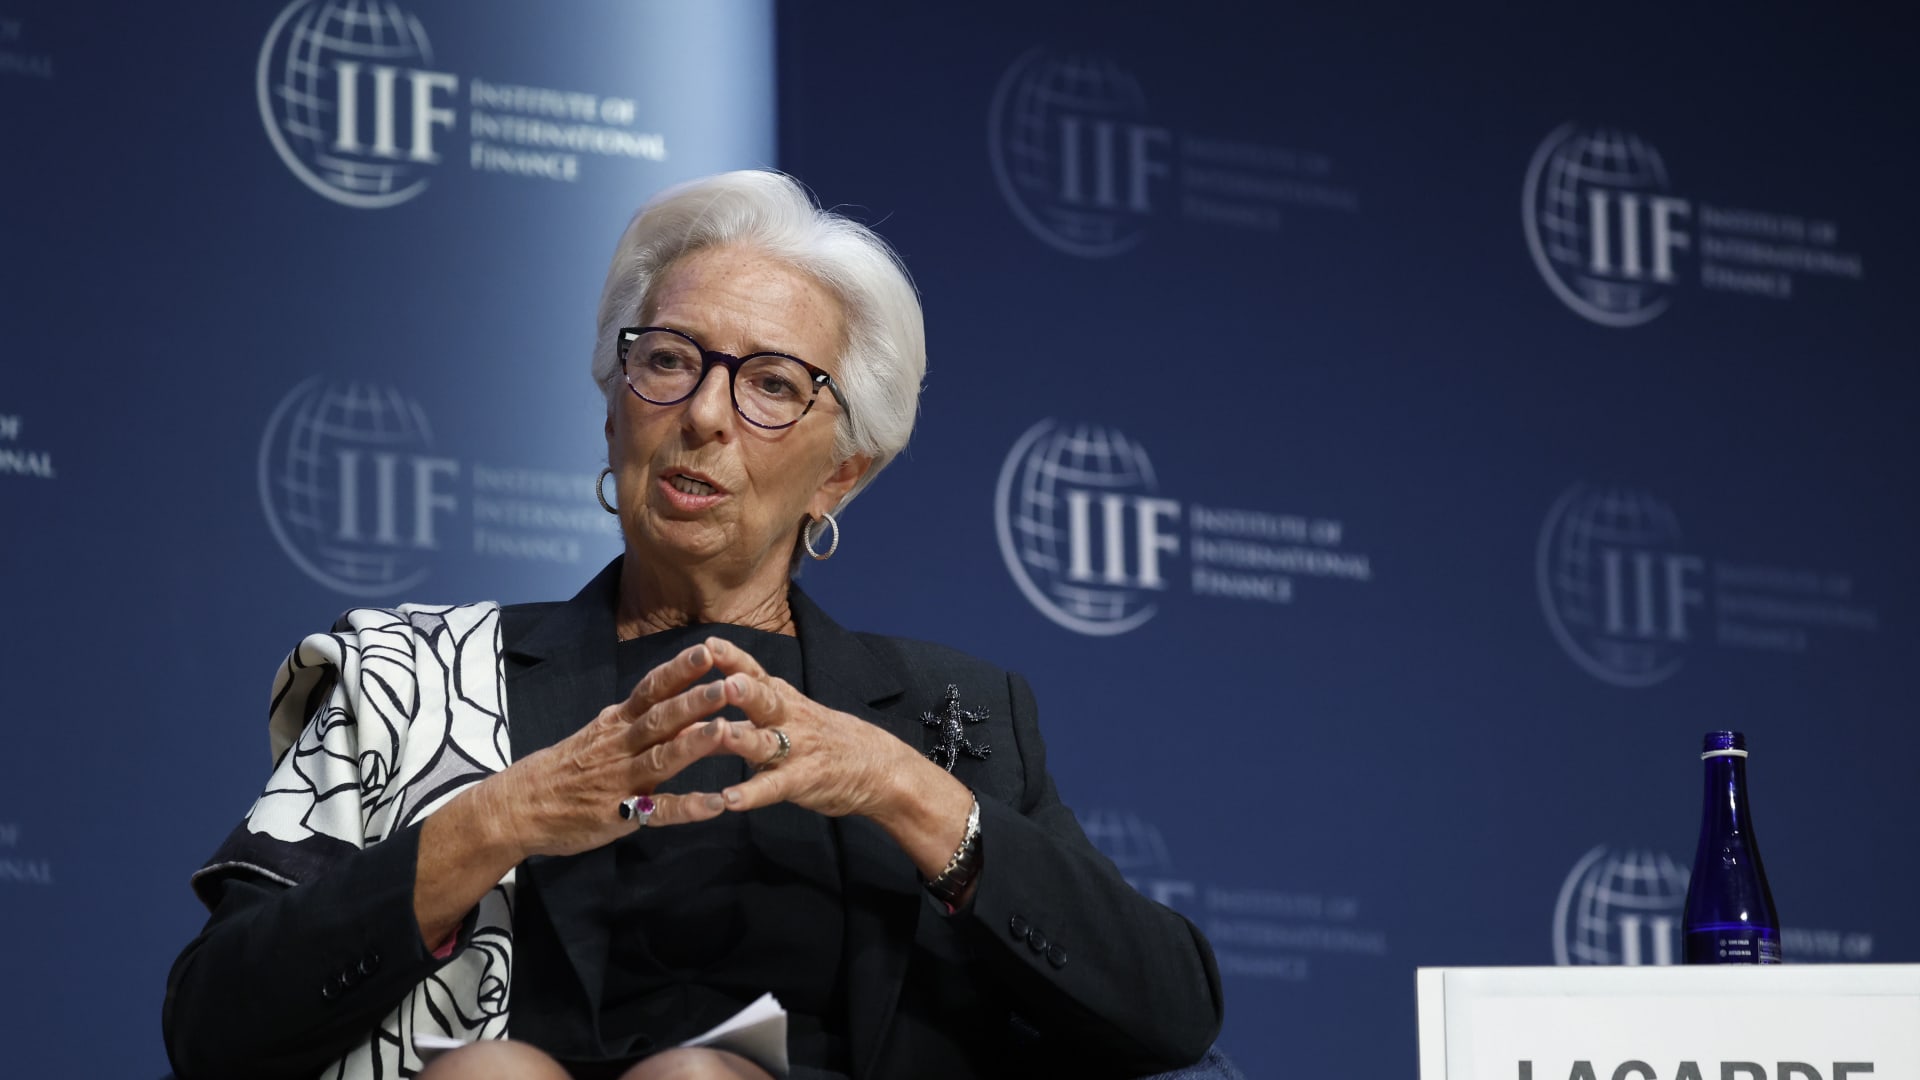 ECB may have to restrict growth to control inflation Lagarde says – CNBC